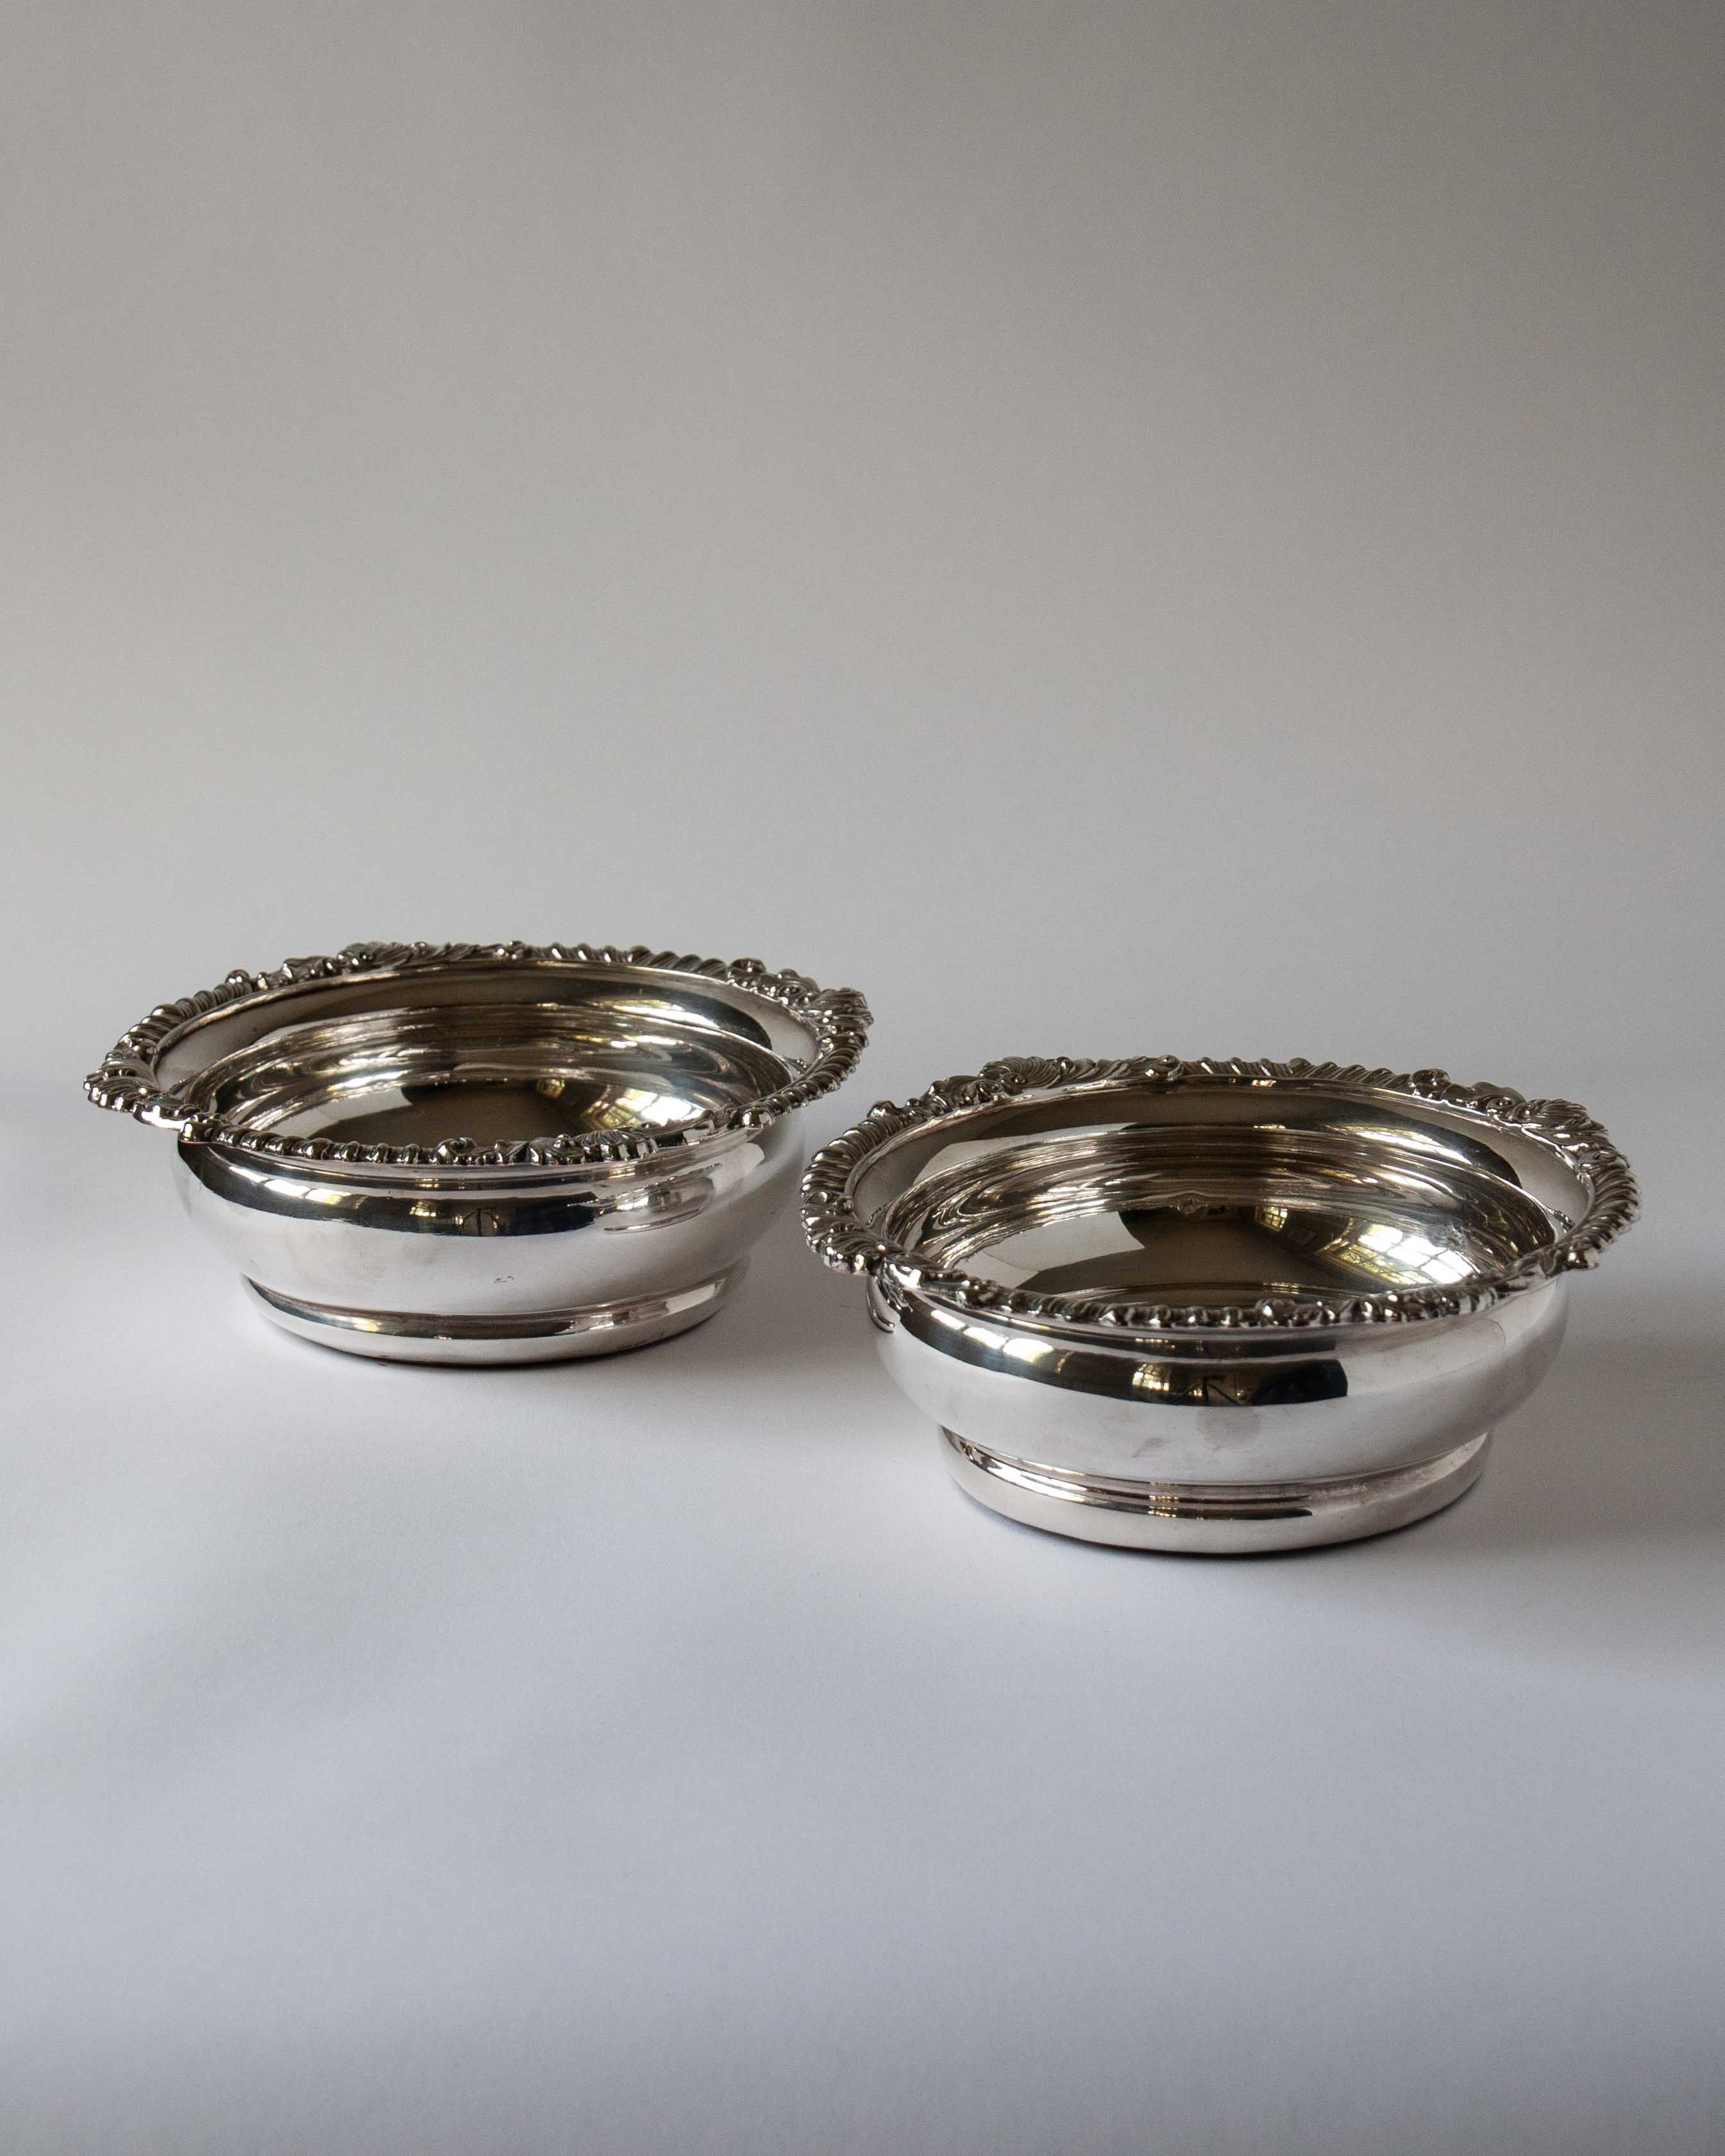 Antique Silver Wine Coasters | Anboise